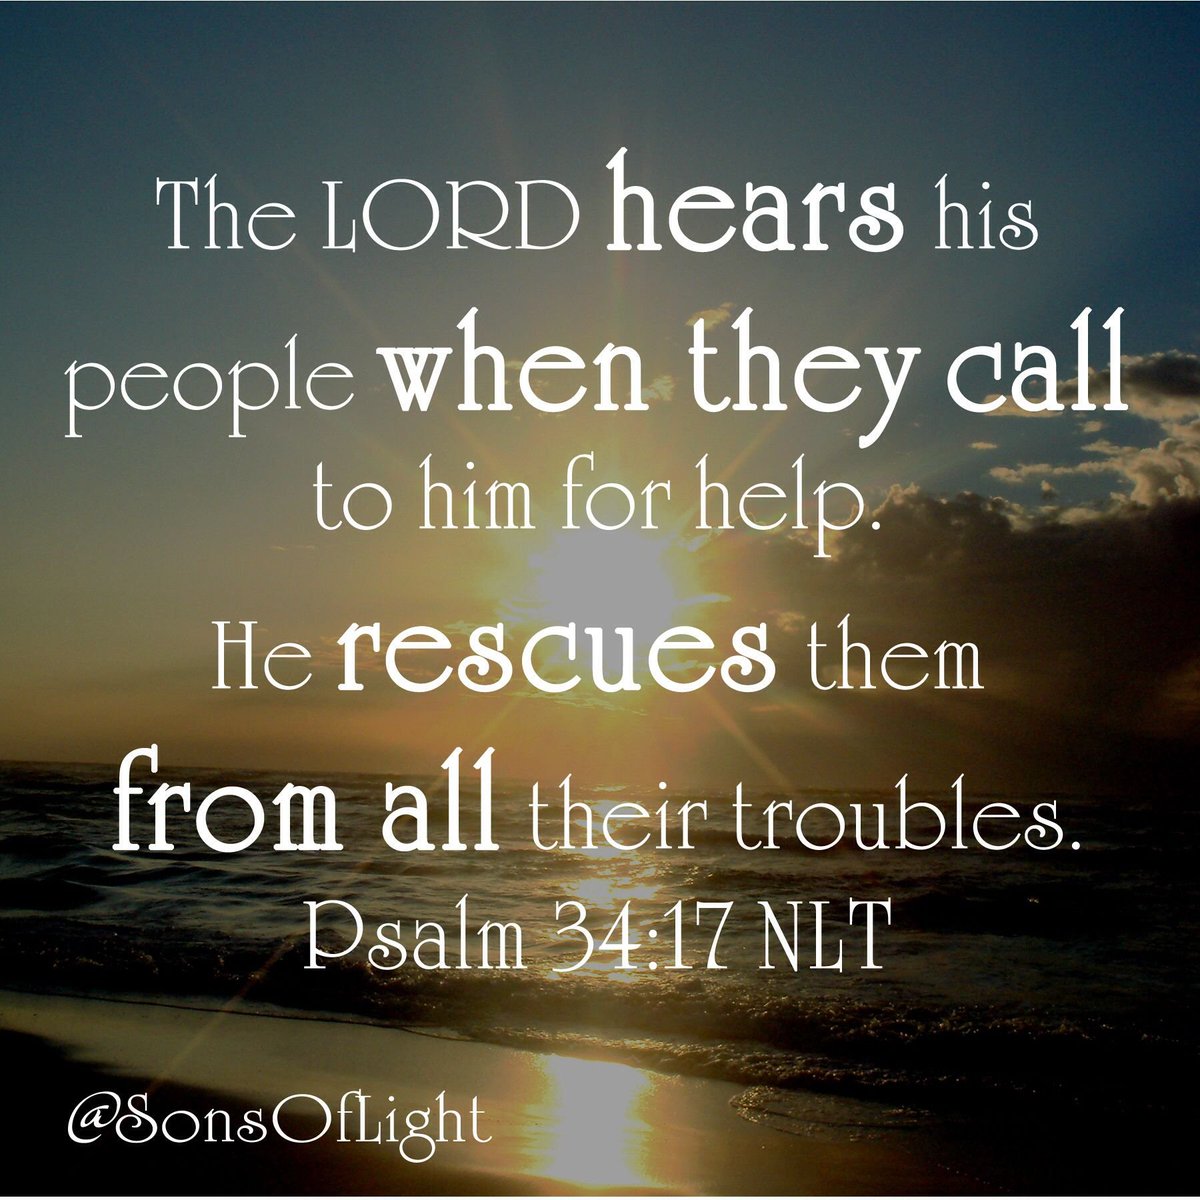 I never stop praying because I know The Lord our God hears us
#PraiseTheLord 
Amen